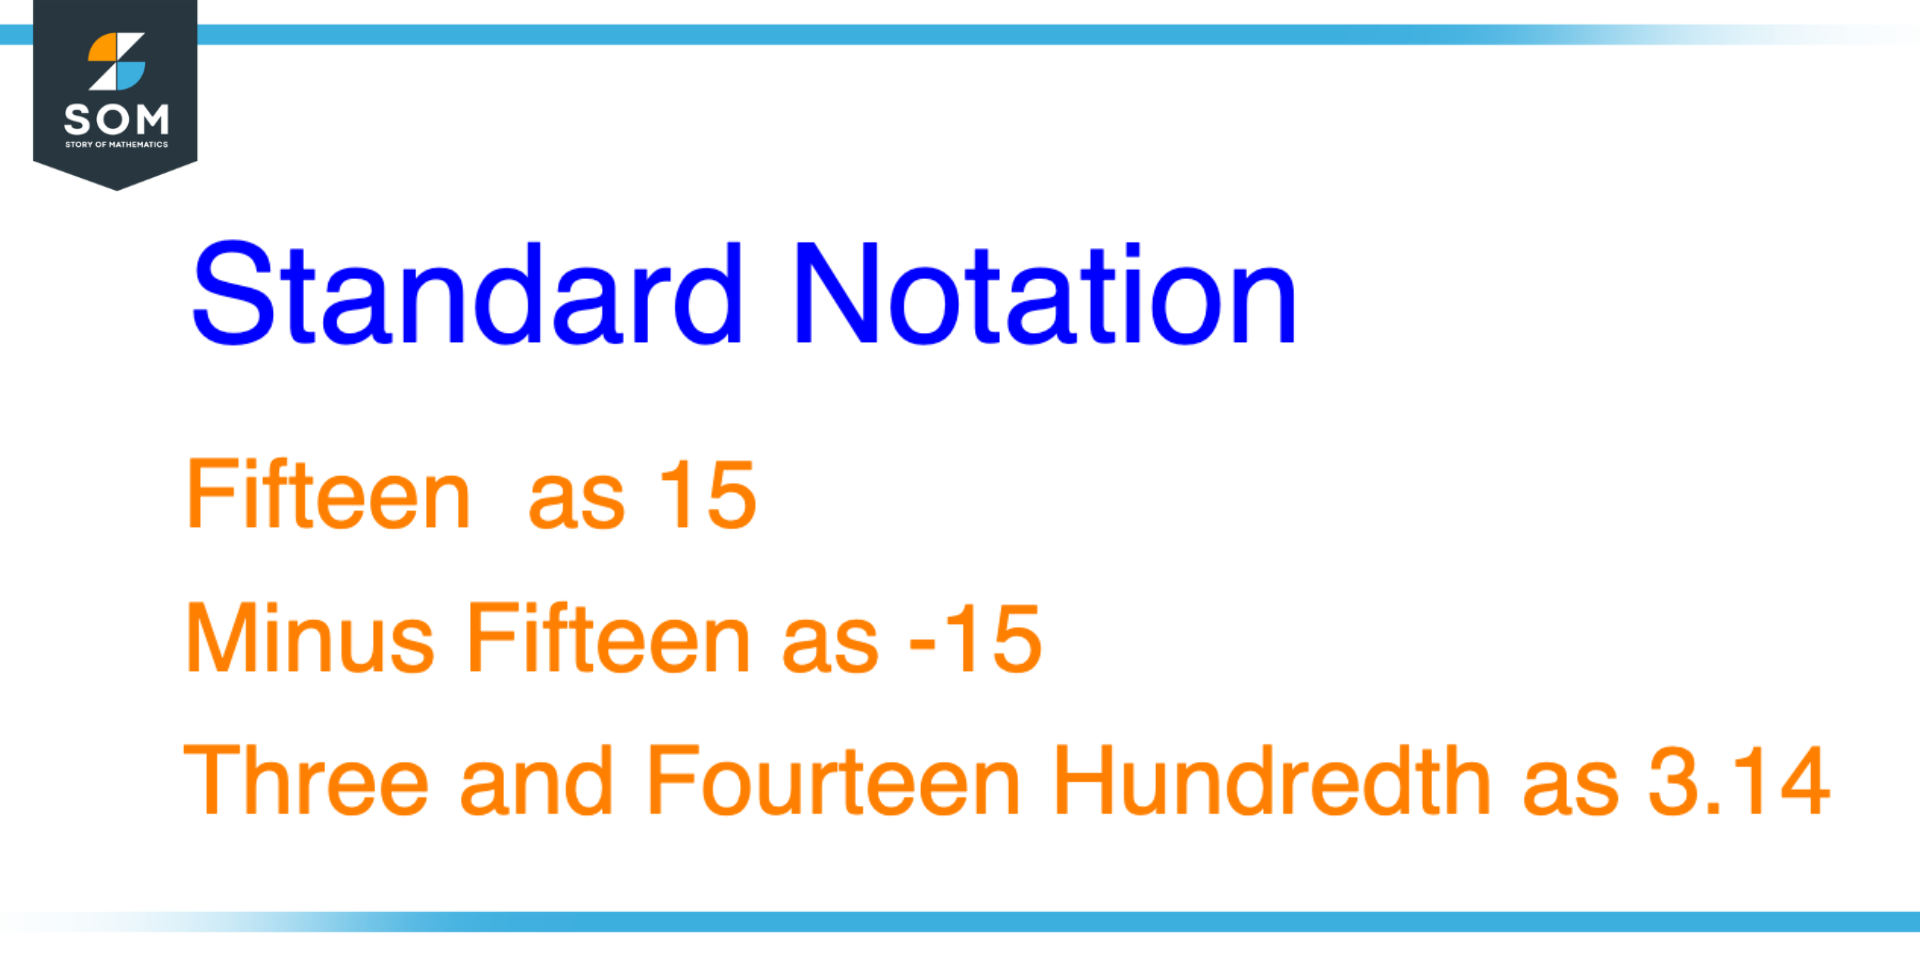 Overview of Standard Notation